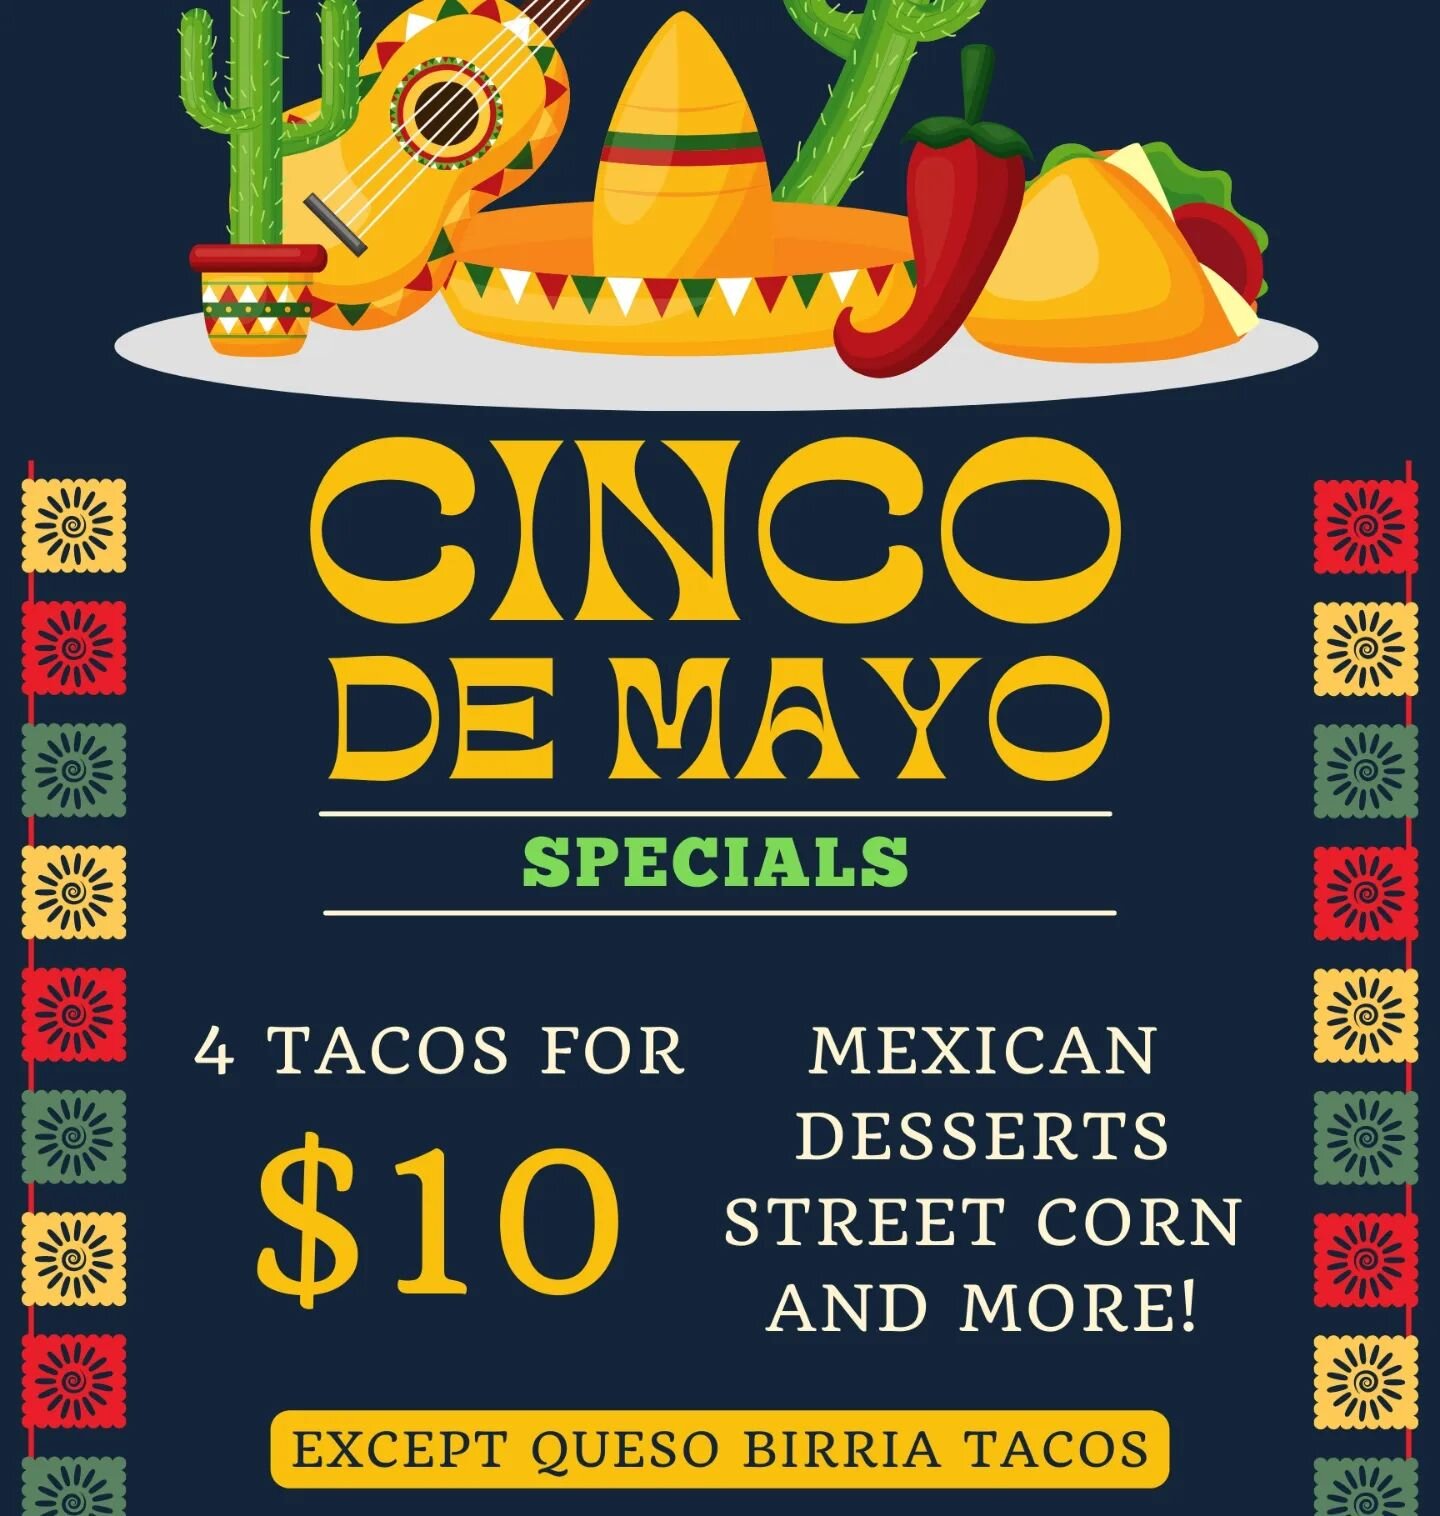 Cinco de Mayo deal!! If you're craving Mexican food, make sure you put us on your list.

🇲🇽🇲🇽🇲🇽🇲🇽🇲🇽🇲🇽🇲🇽🇲🇽🇲🇽🇲🇽

@tacos.munchies 

#chseats #mexicanfood #Tamales #homemadefood #foodtruck #comidamexicana #Mexican #mexicancuisine #tac